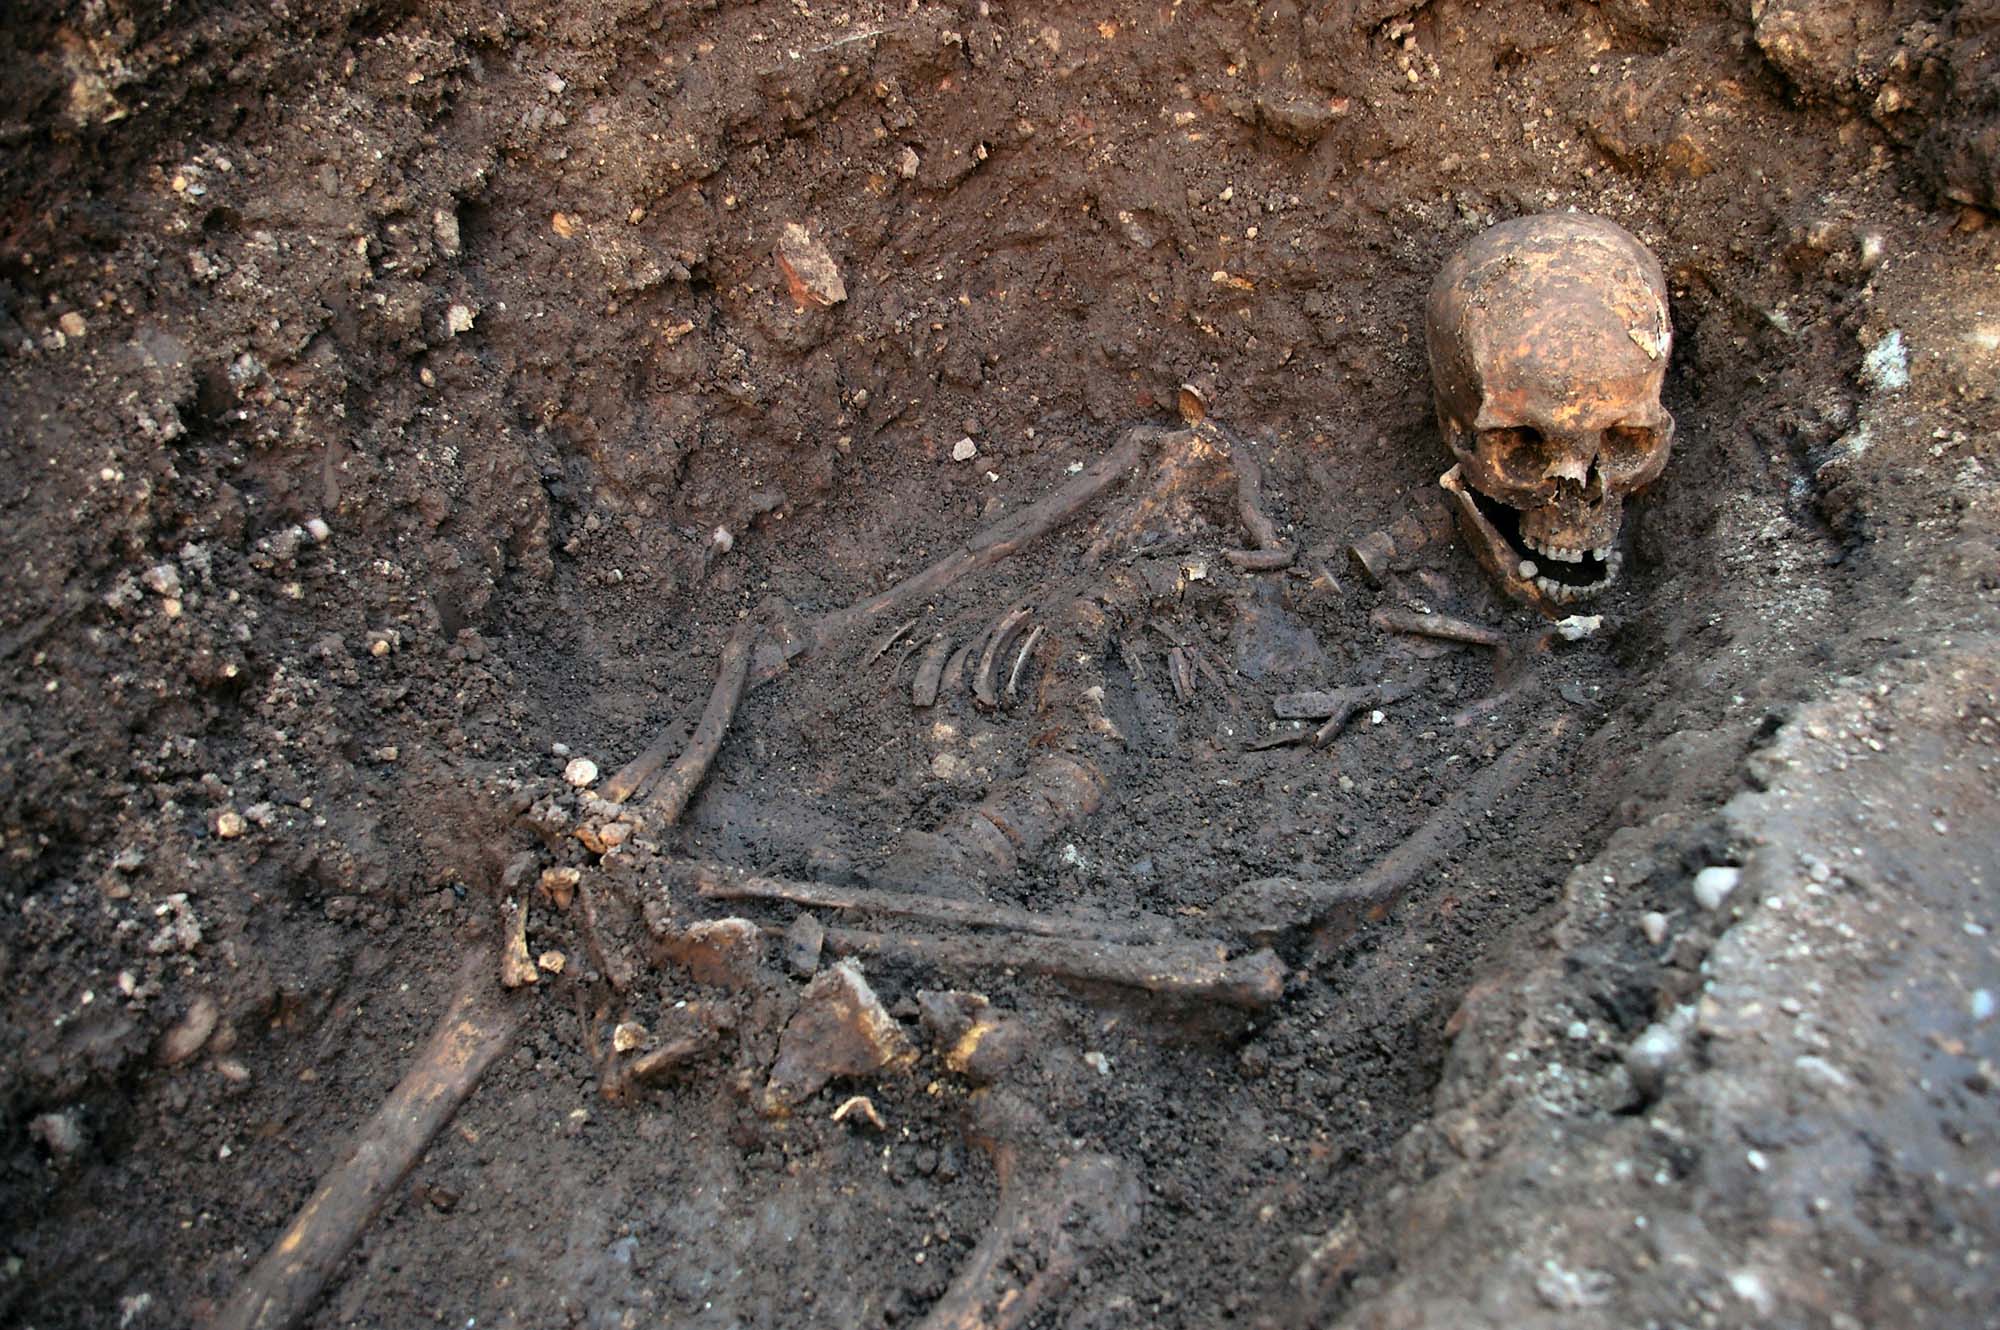 Richard III’s remains in situ in his grave shortly after their discovery in 2012 - University of Leicester